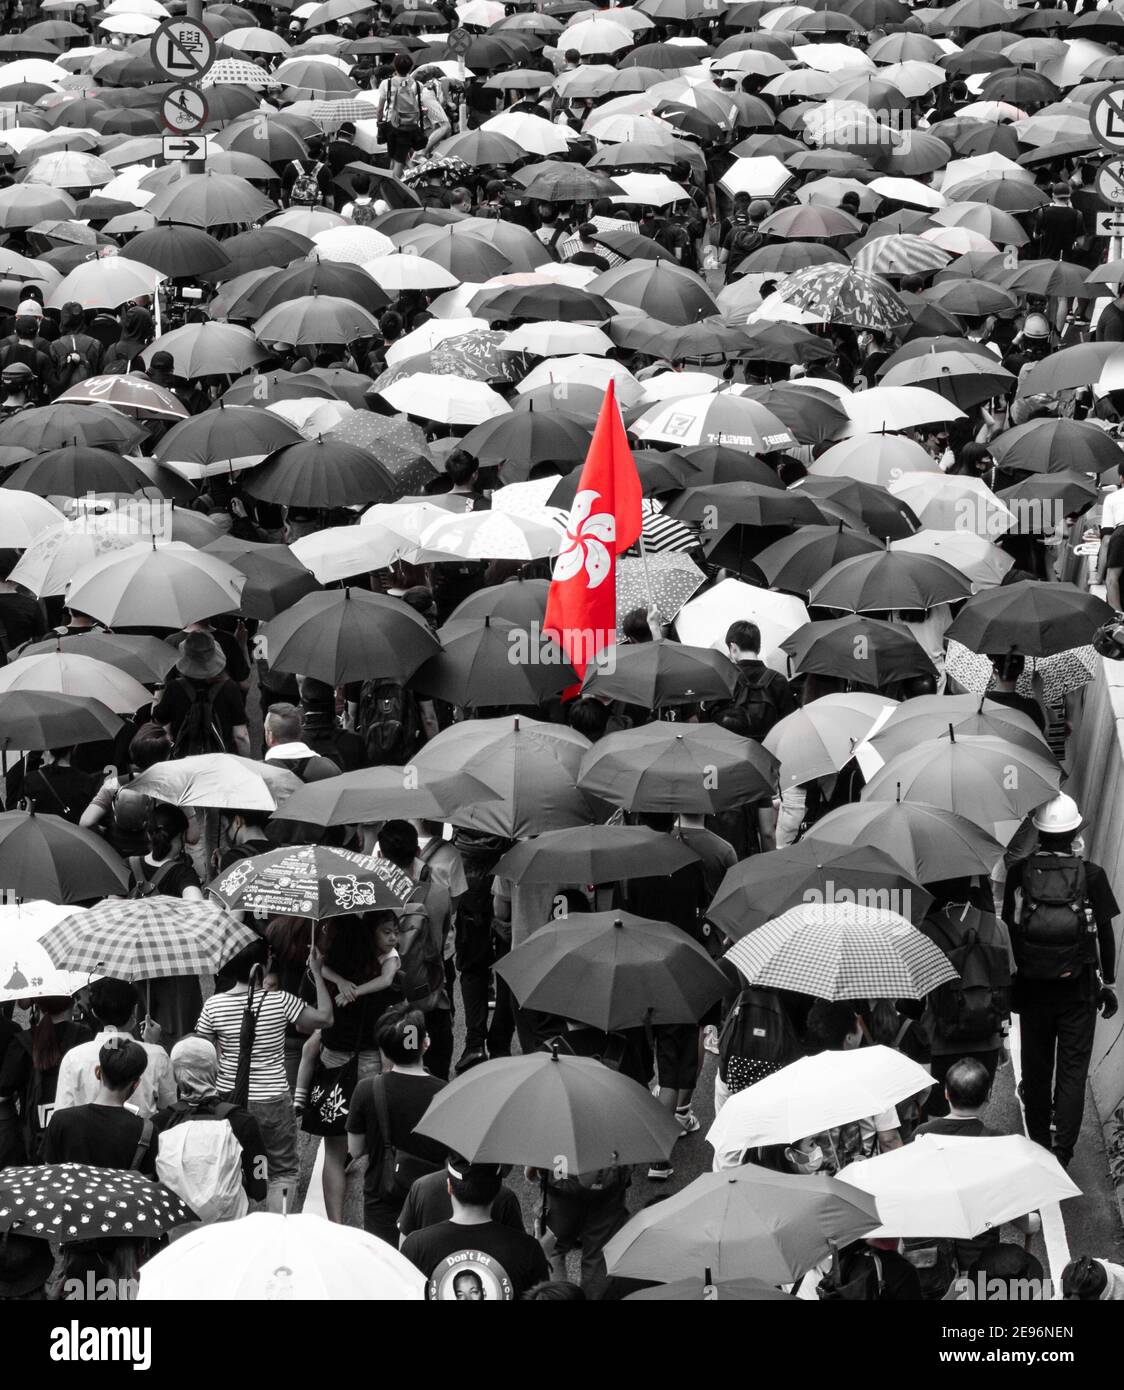 Thousands march peacefully through Central Hong Kong 31 August 2019.  Virtually everyone has an umbrella and a single Hong Kong flag is carried with the crowd.  Taken from above. Stock Photo